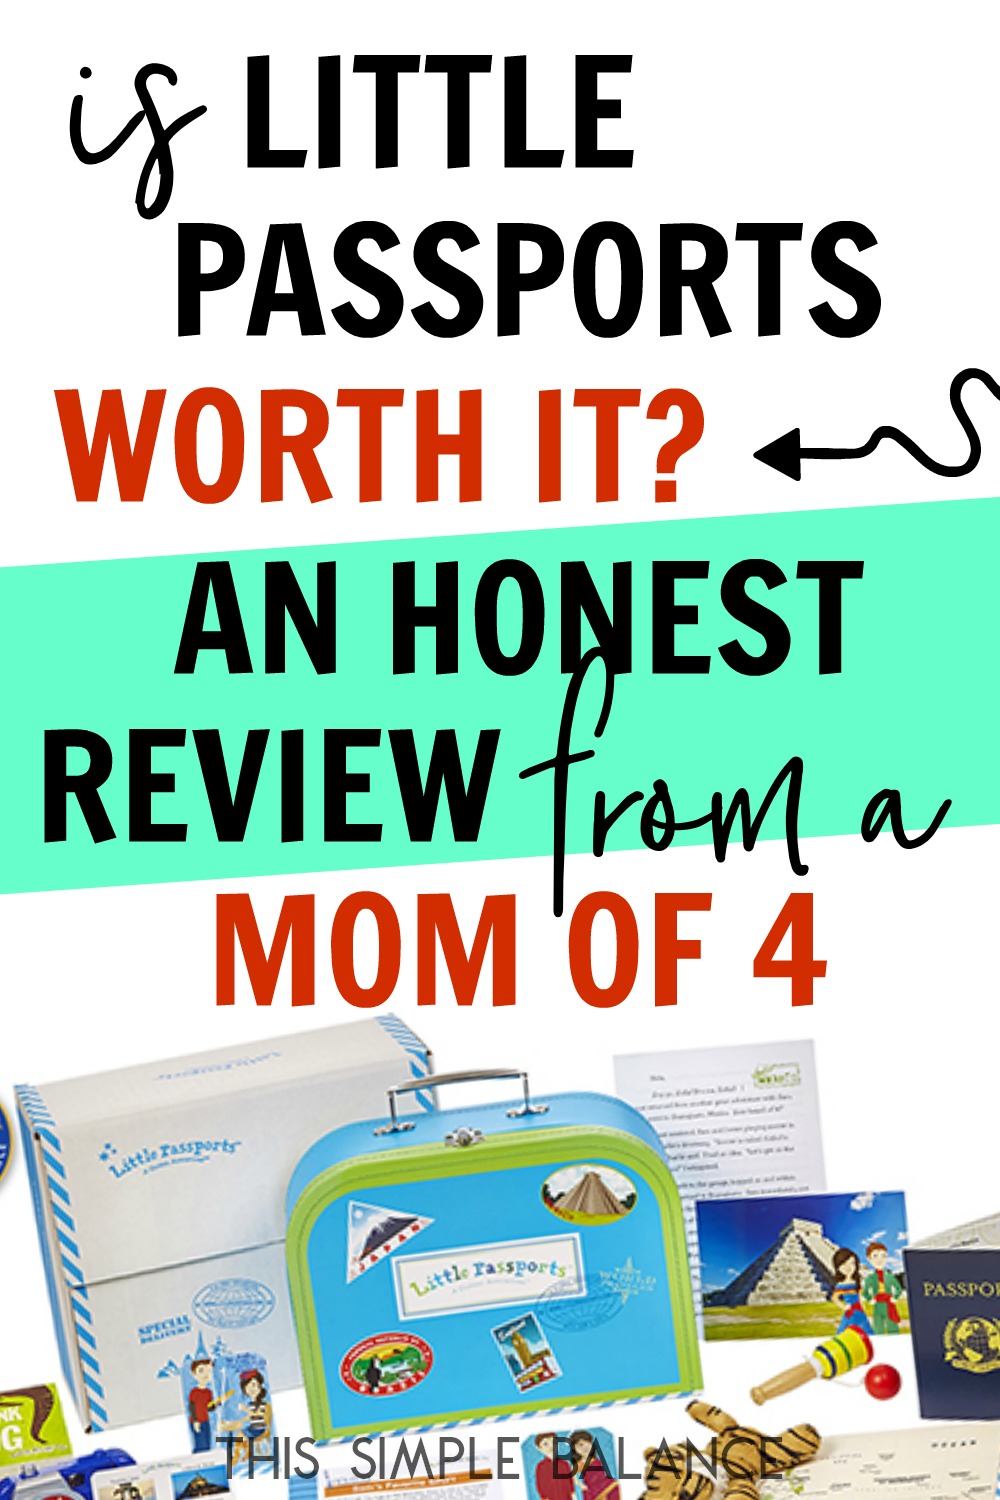 Little Passports kit with contents of several kits displayed, including passport, with text overlay, "Is Little Passports Worth It? An Honest Review from a Mom of 4"